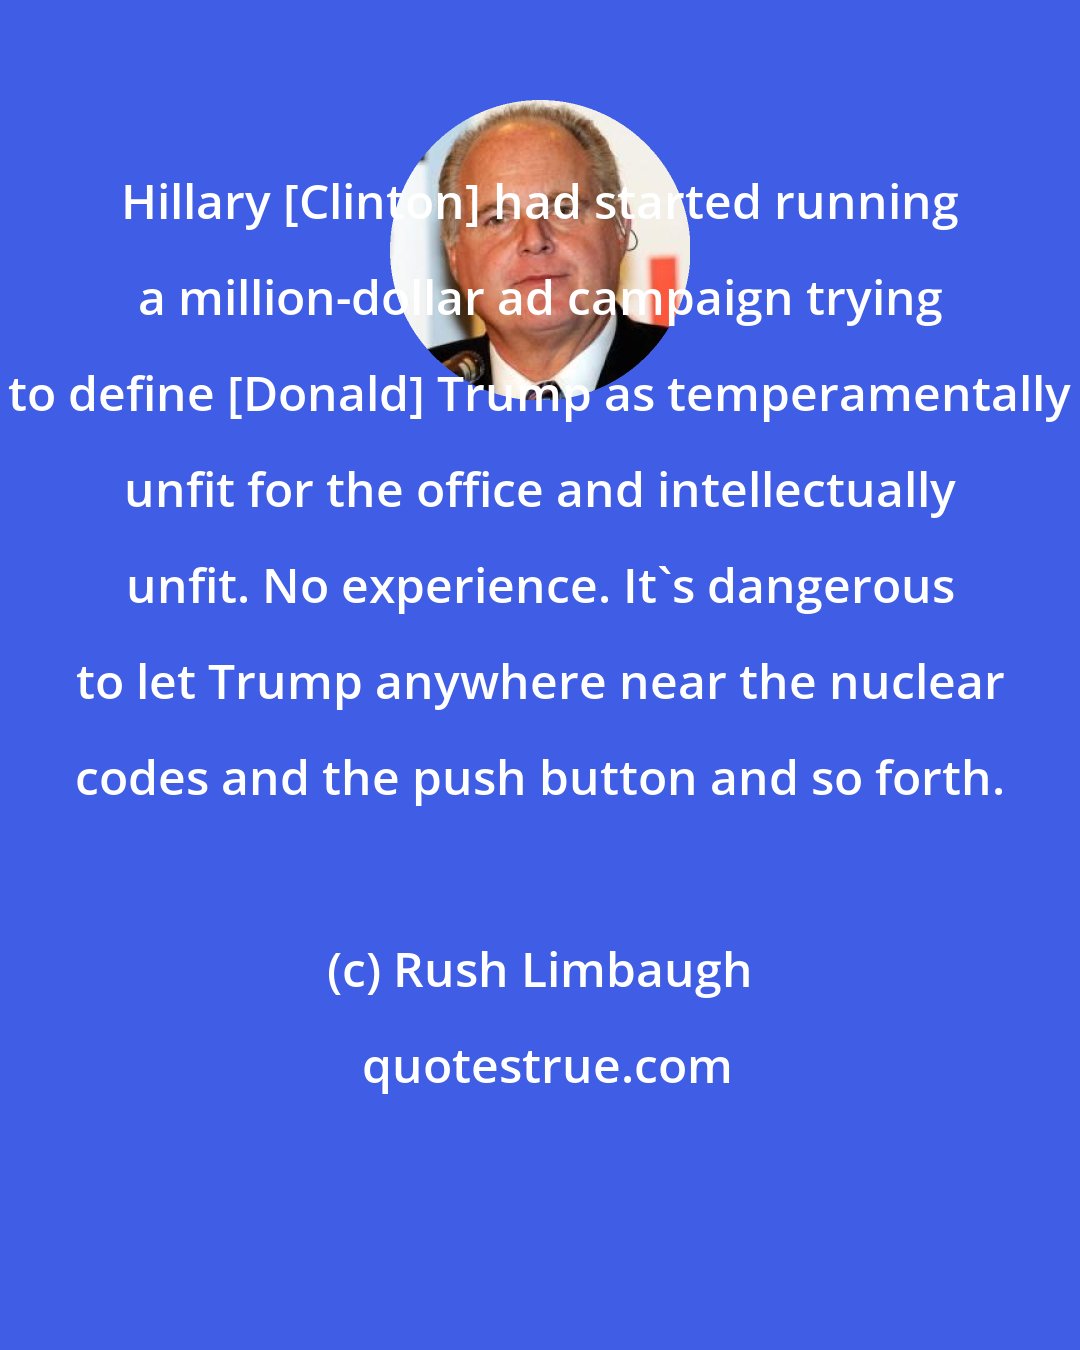 Rush Limbaugh: Hillary [Clinton] had started running a million-dollar ad campaign trying to define [Donald] Trump as temperamentally unfit for the office and intellectually unfit. No experience. It's dangerous to let Trump anywhere near the nuclear codes and the push button and so forth.